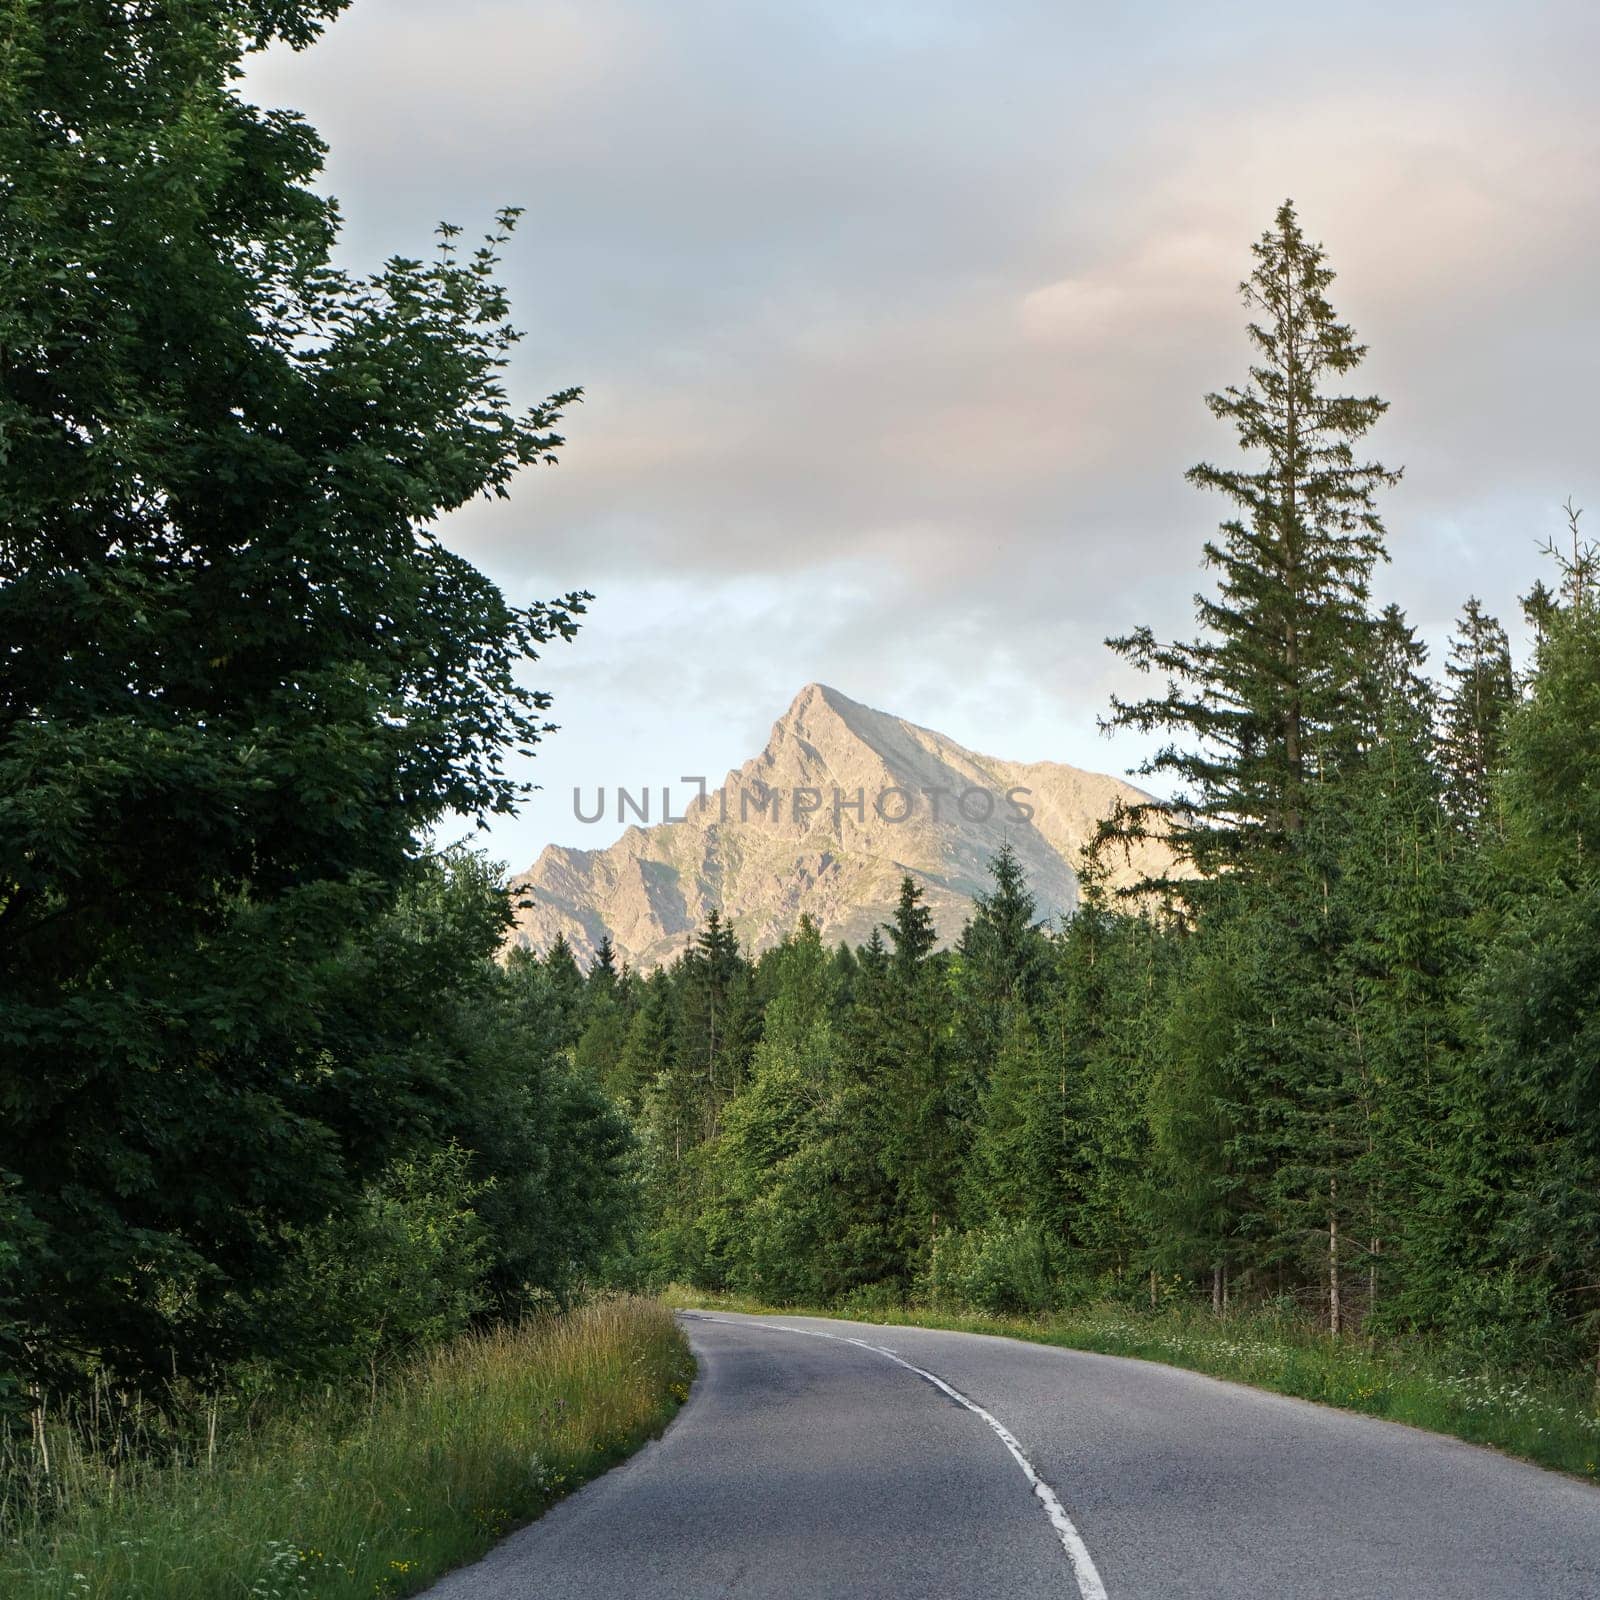 Forest asphalt road curve, coniferous trees and grass on both sides, mount Krivan peak (symbol of Slovakia) with sunset sky above in distance by Ivanko